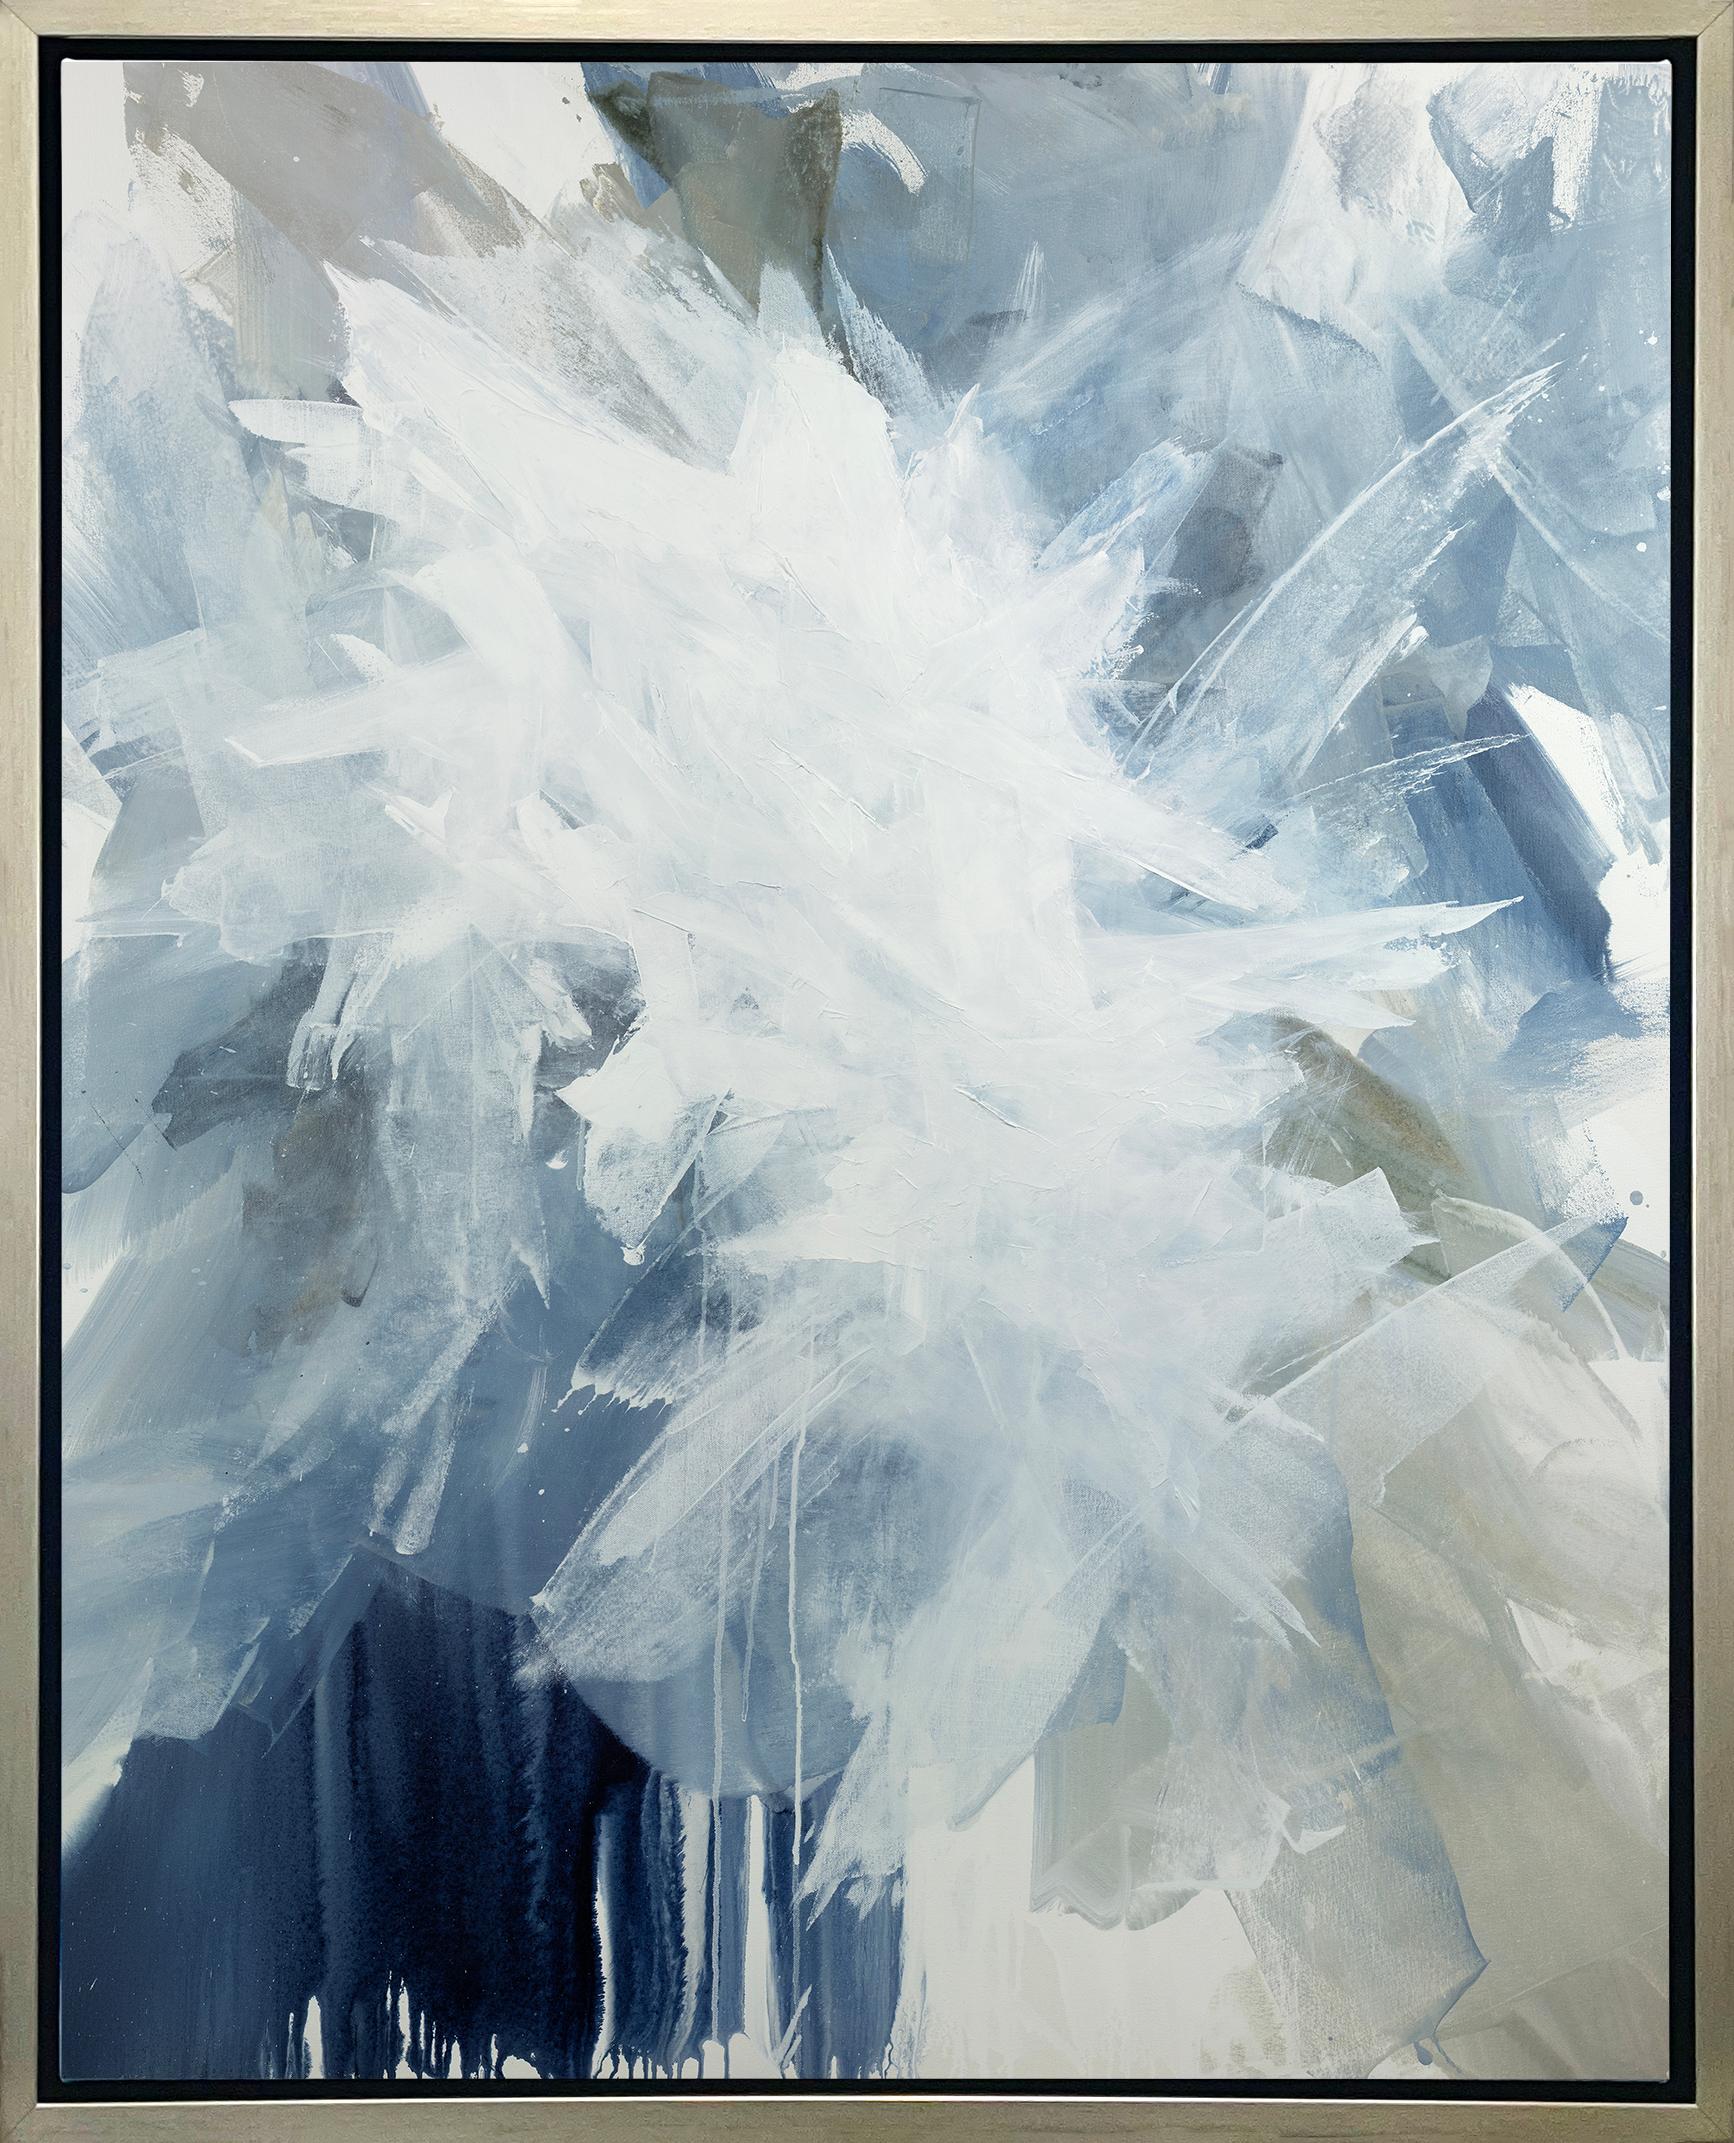 Teodora Guererra Abstract Print - "White Dove, " Framed Limited Edition Giclee Print, 45" x 36"